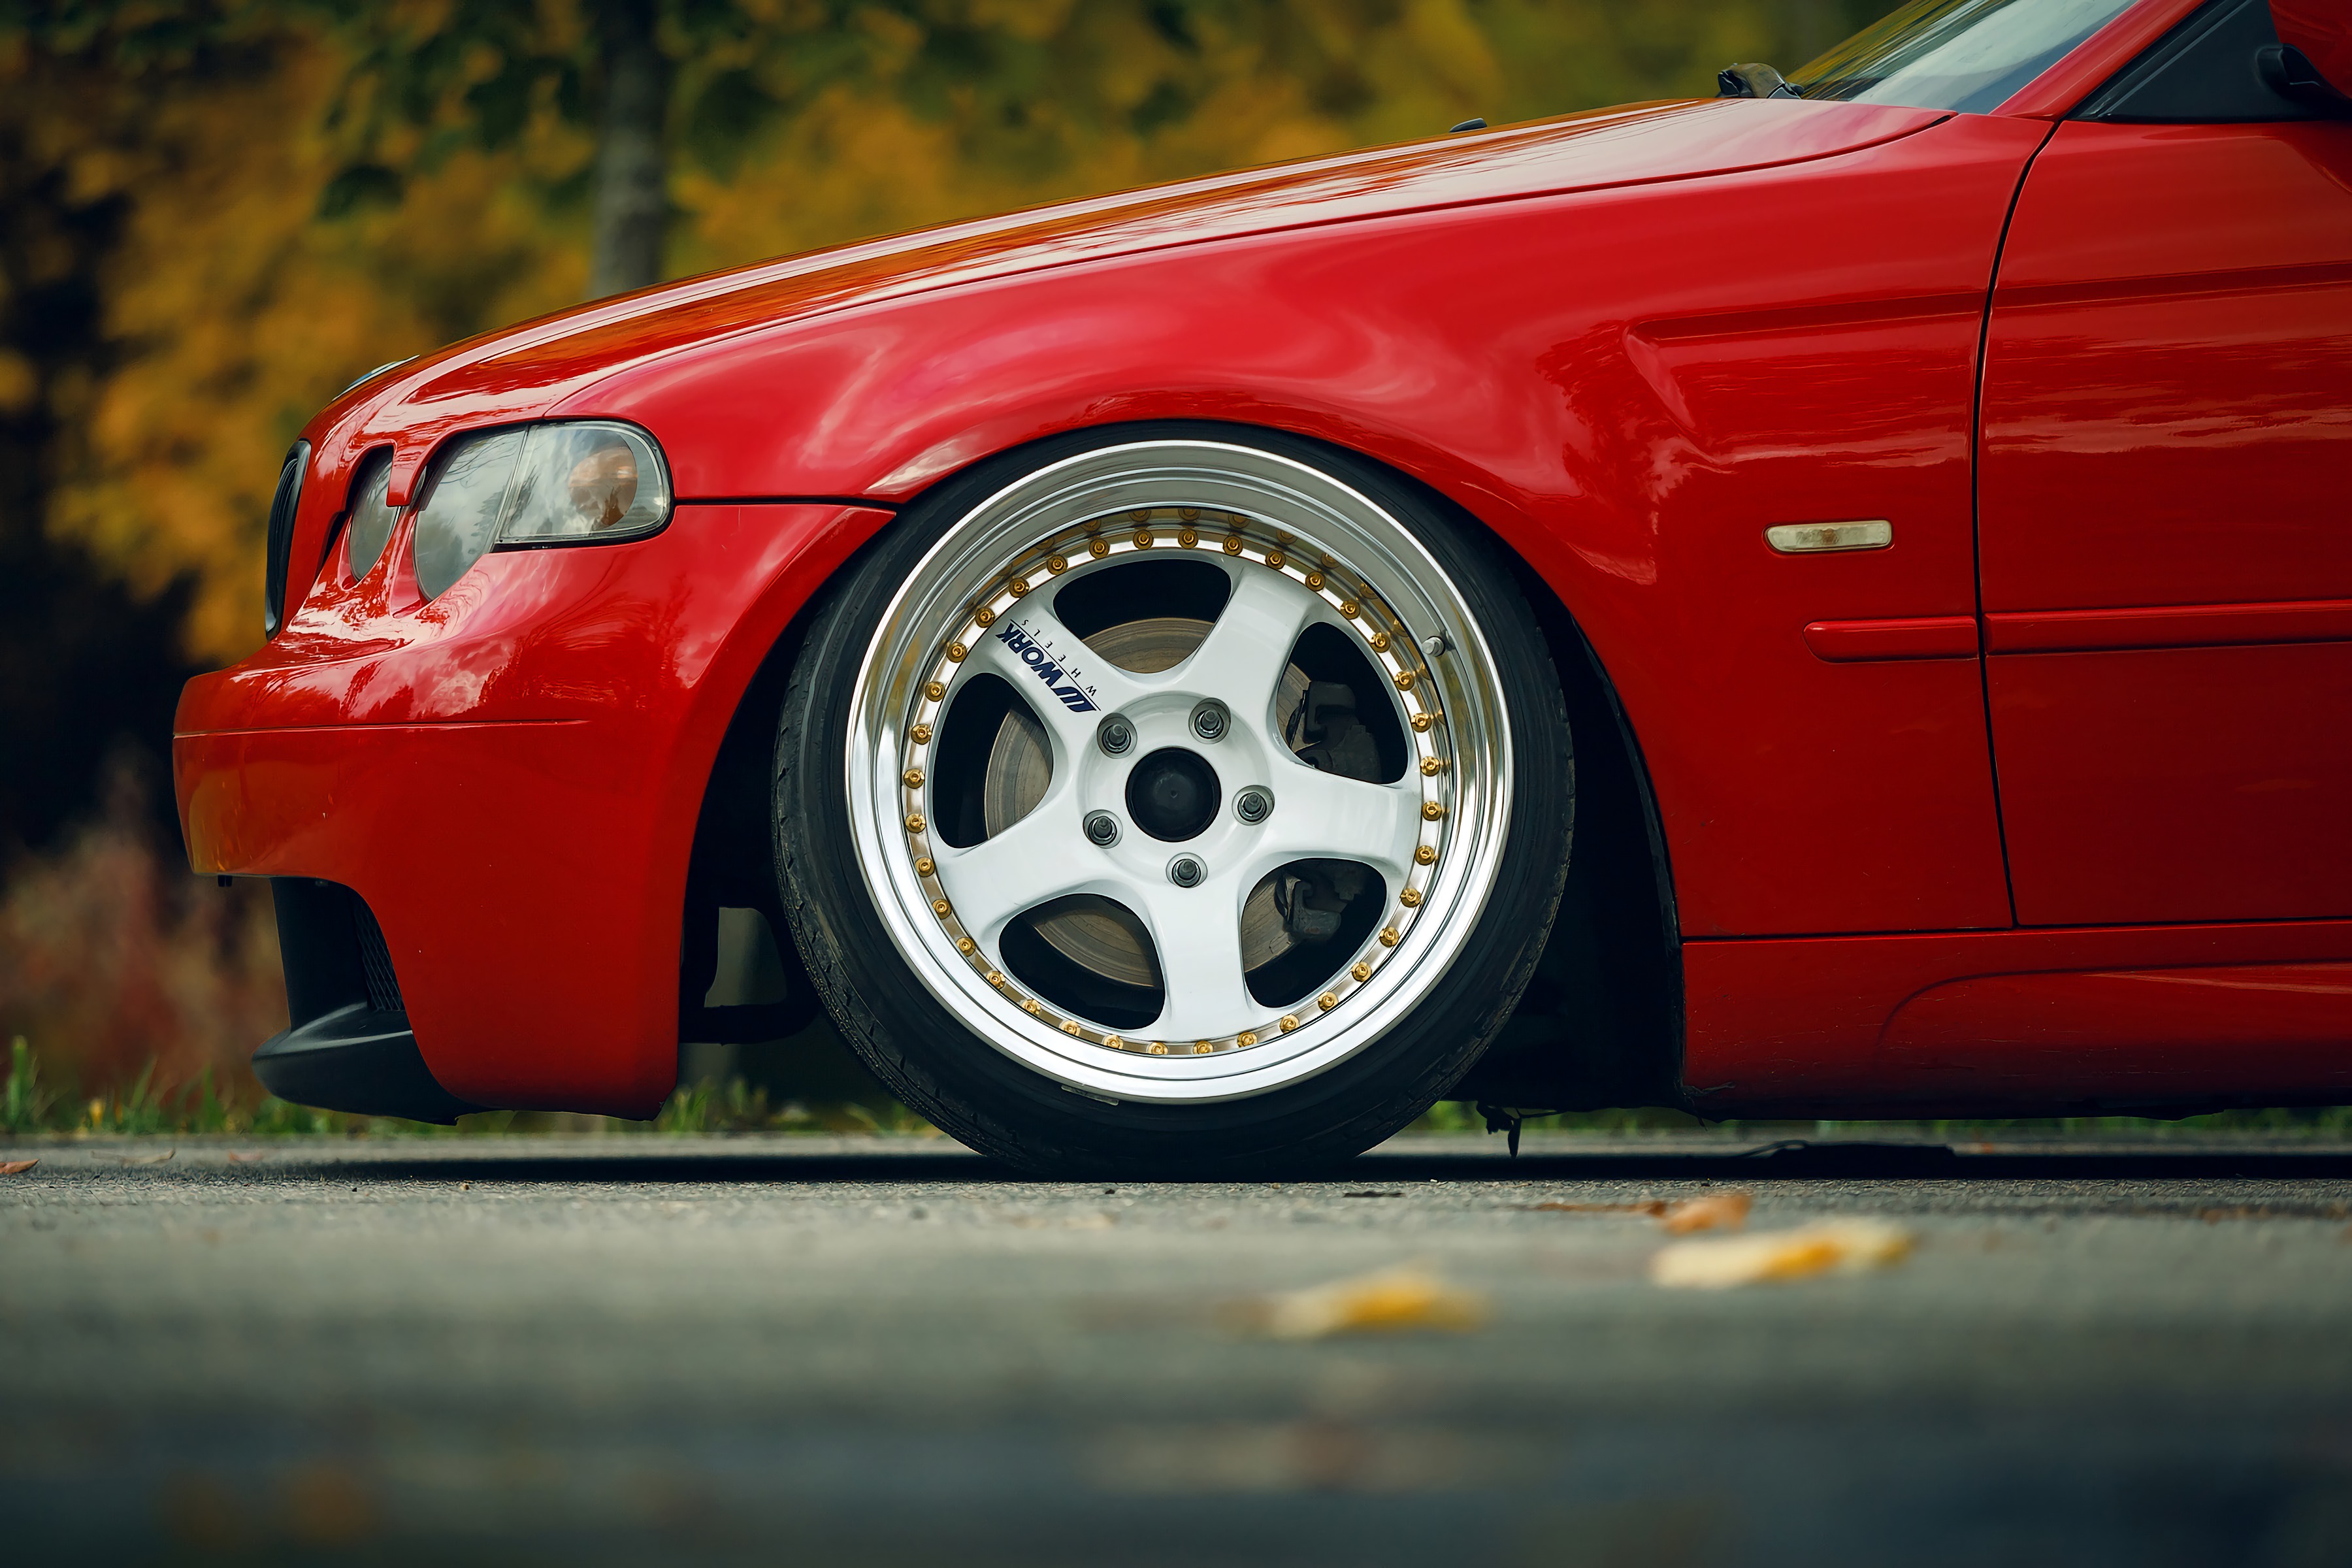 General 3600x2400 BMW stance (cars) Work Wheels red car worm's eye view BMW E46/5 wheels BMW 3 Series red cars vehicle